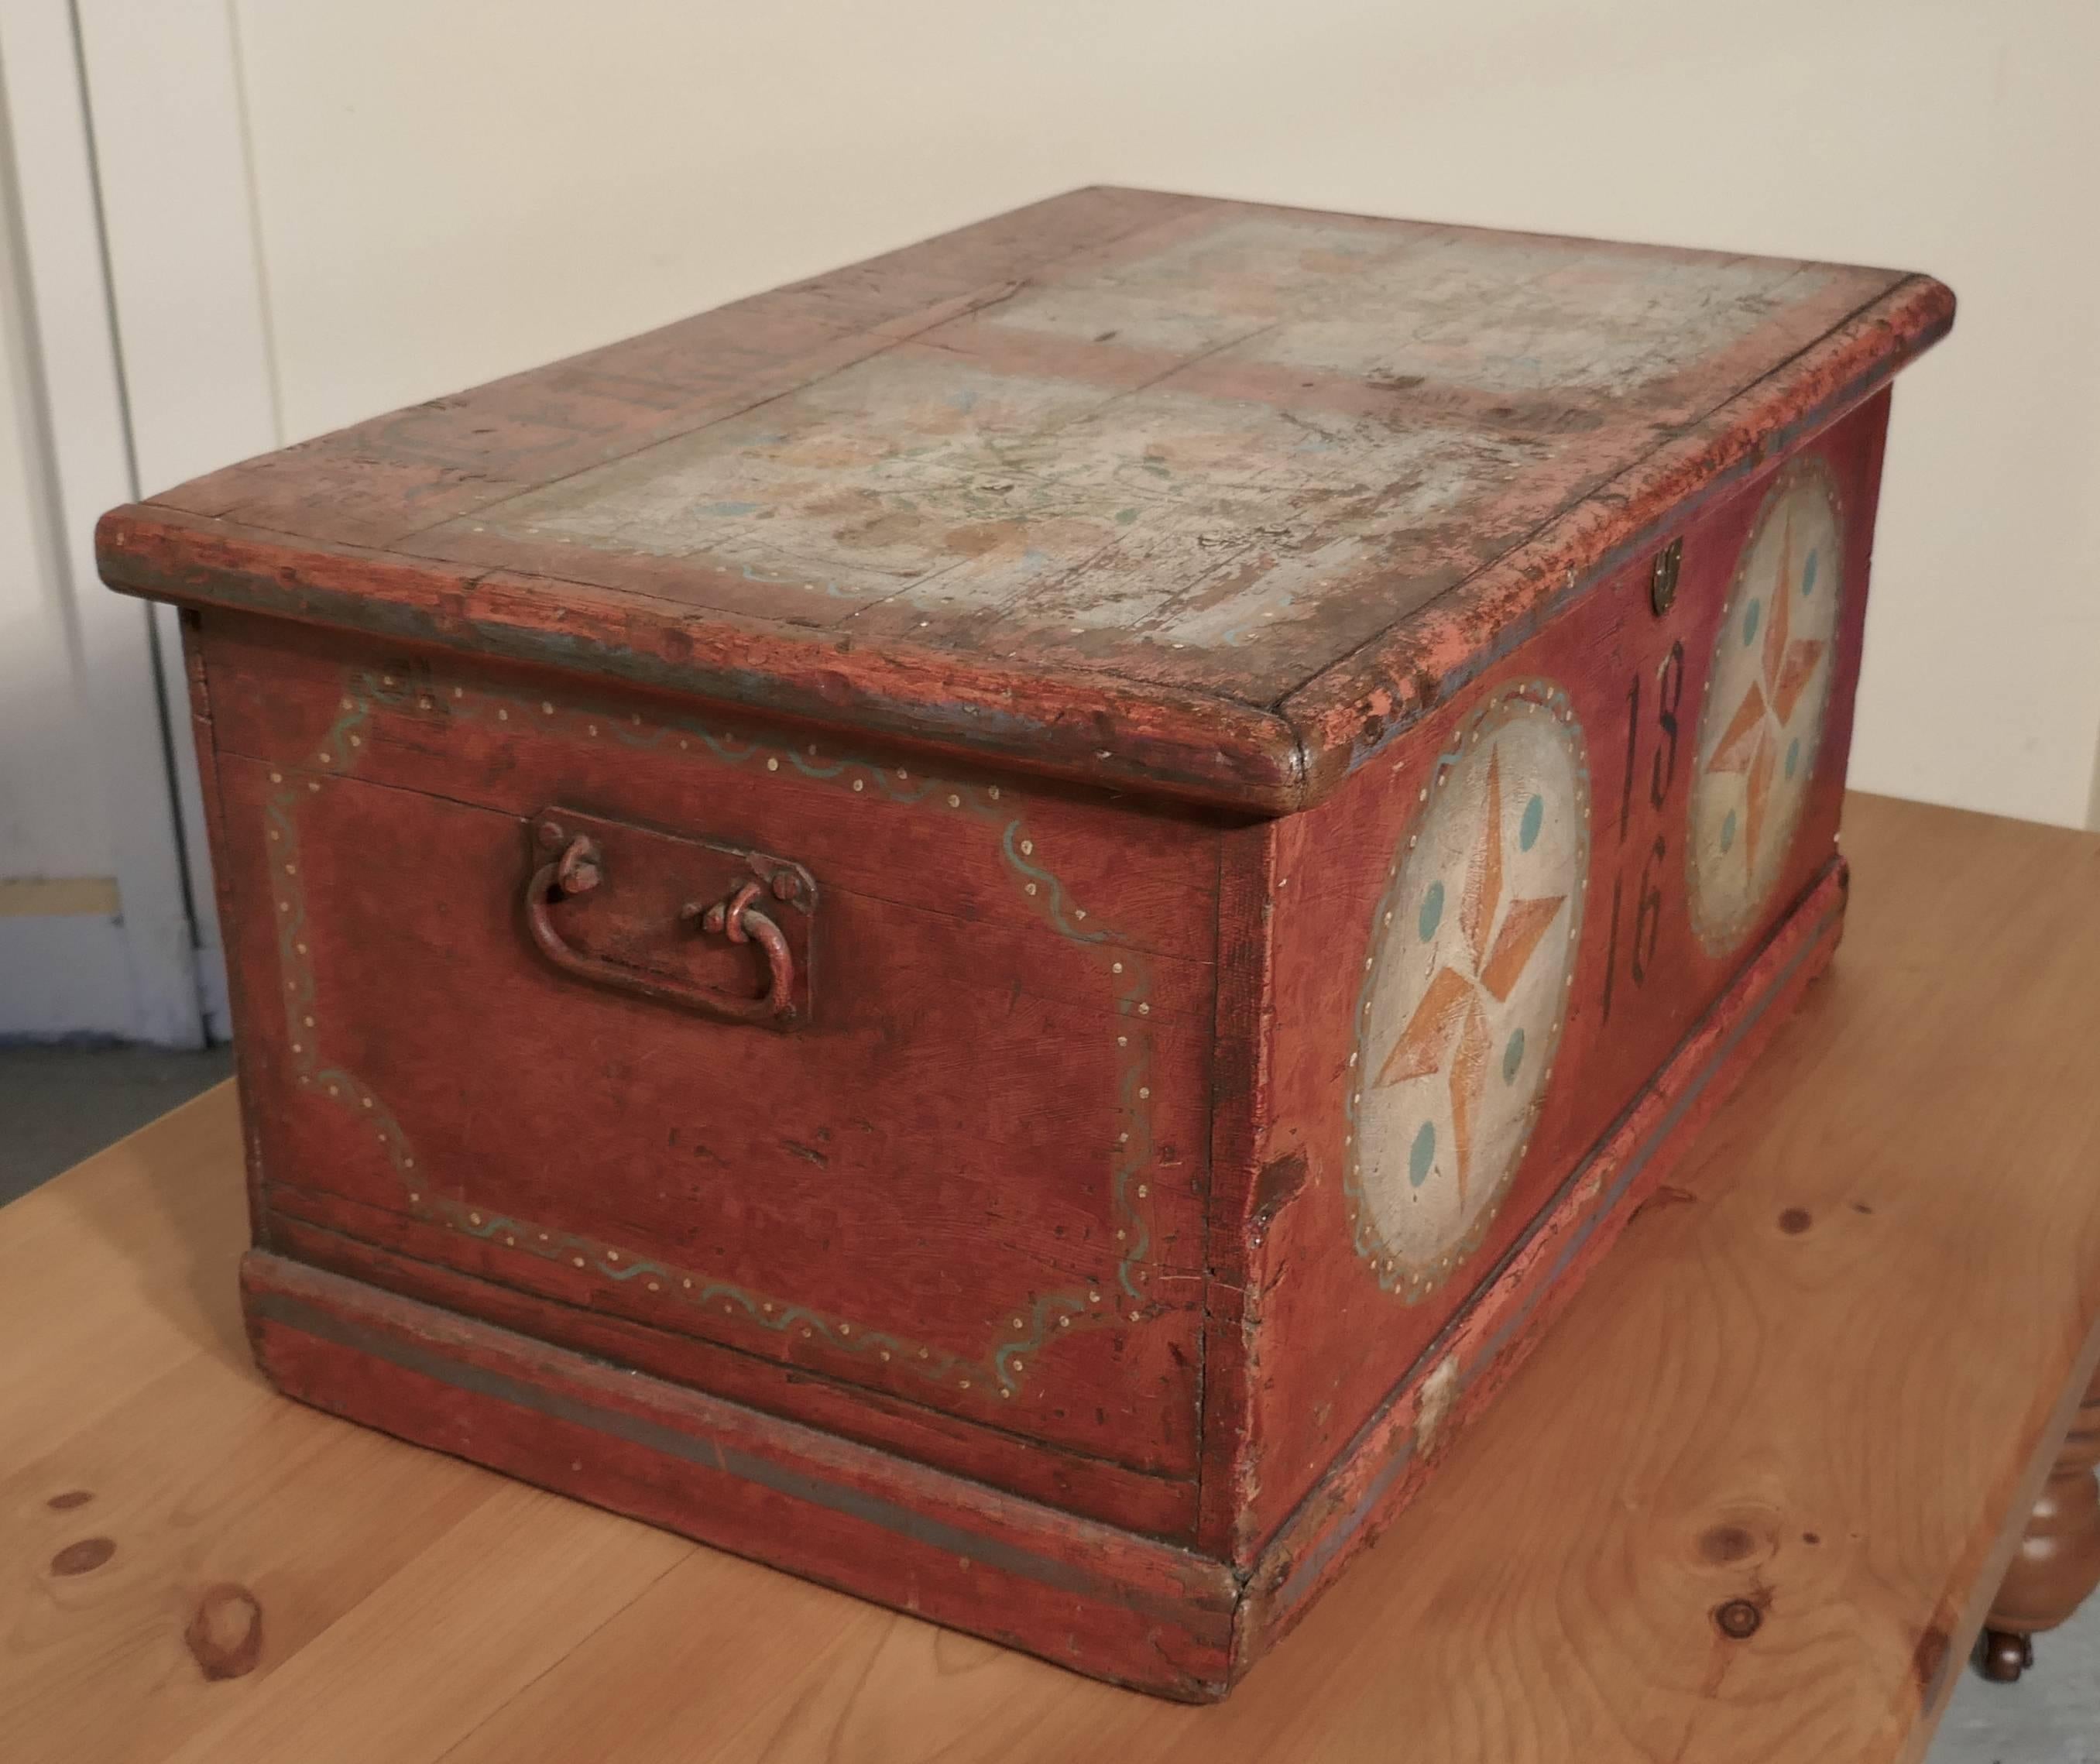 European painted pine chest

The chest has been painted, it has the name Erika Rindt, at the top and the date 1816 painted on the front, the chest is painted with flowers and patterns on a pink/rust colored background

The chest stands on a